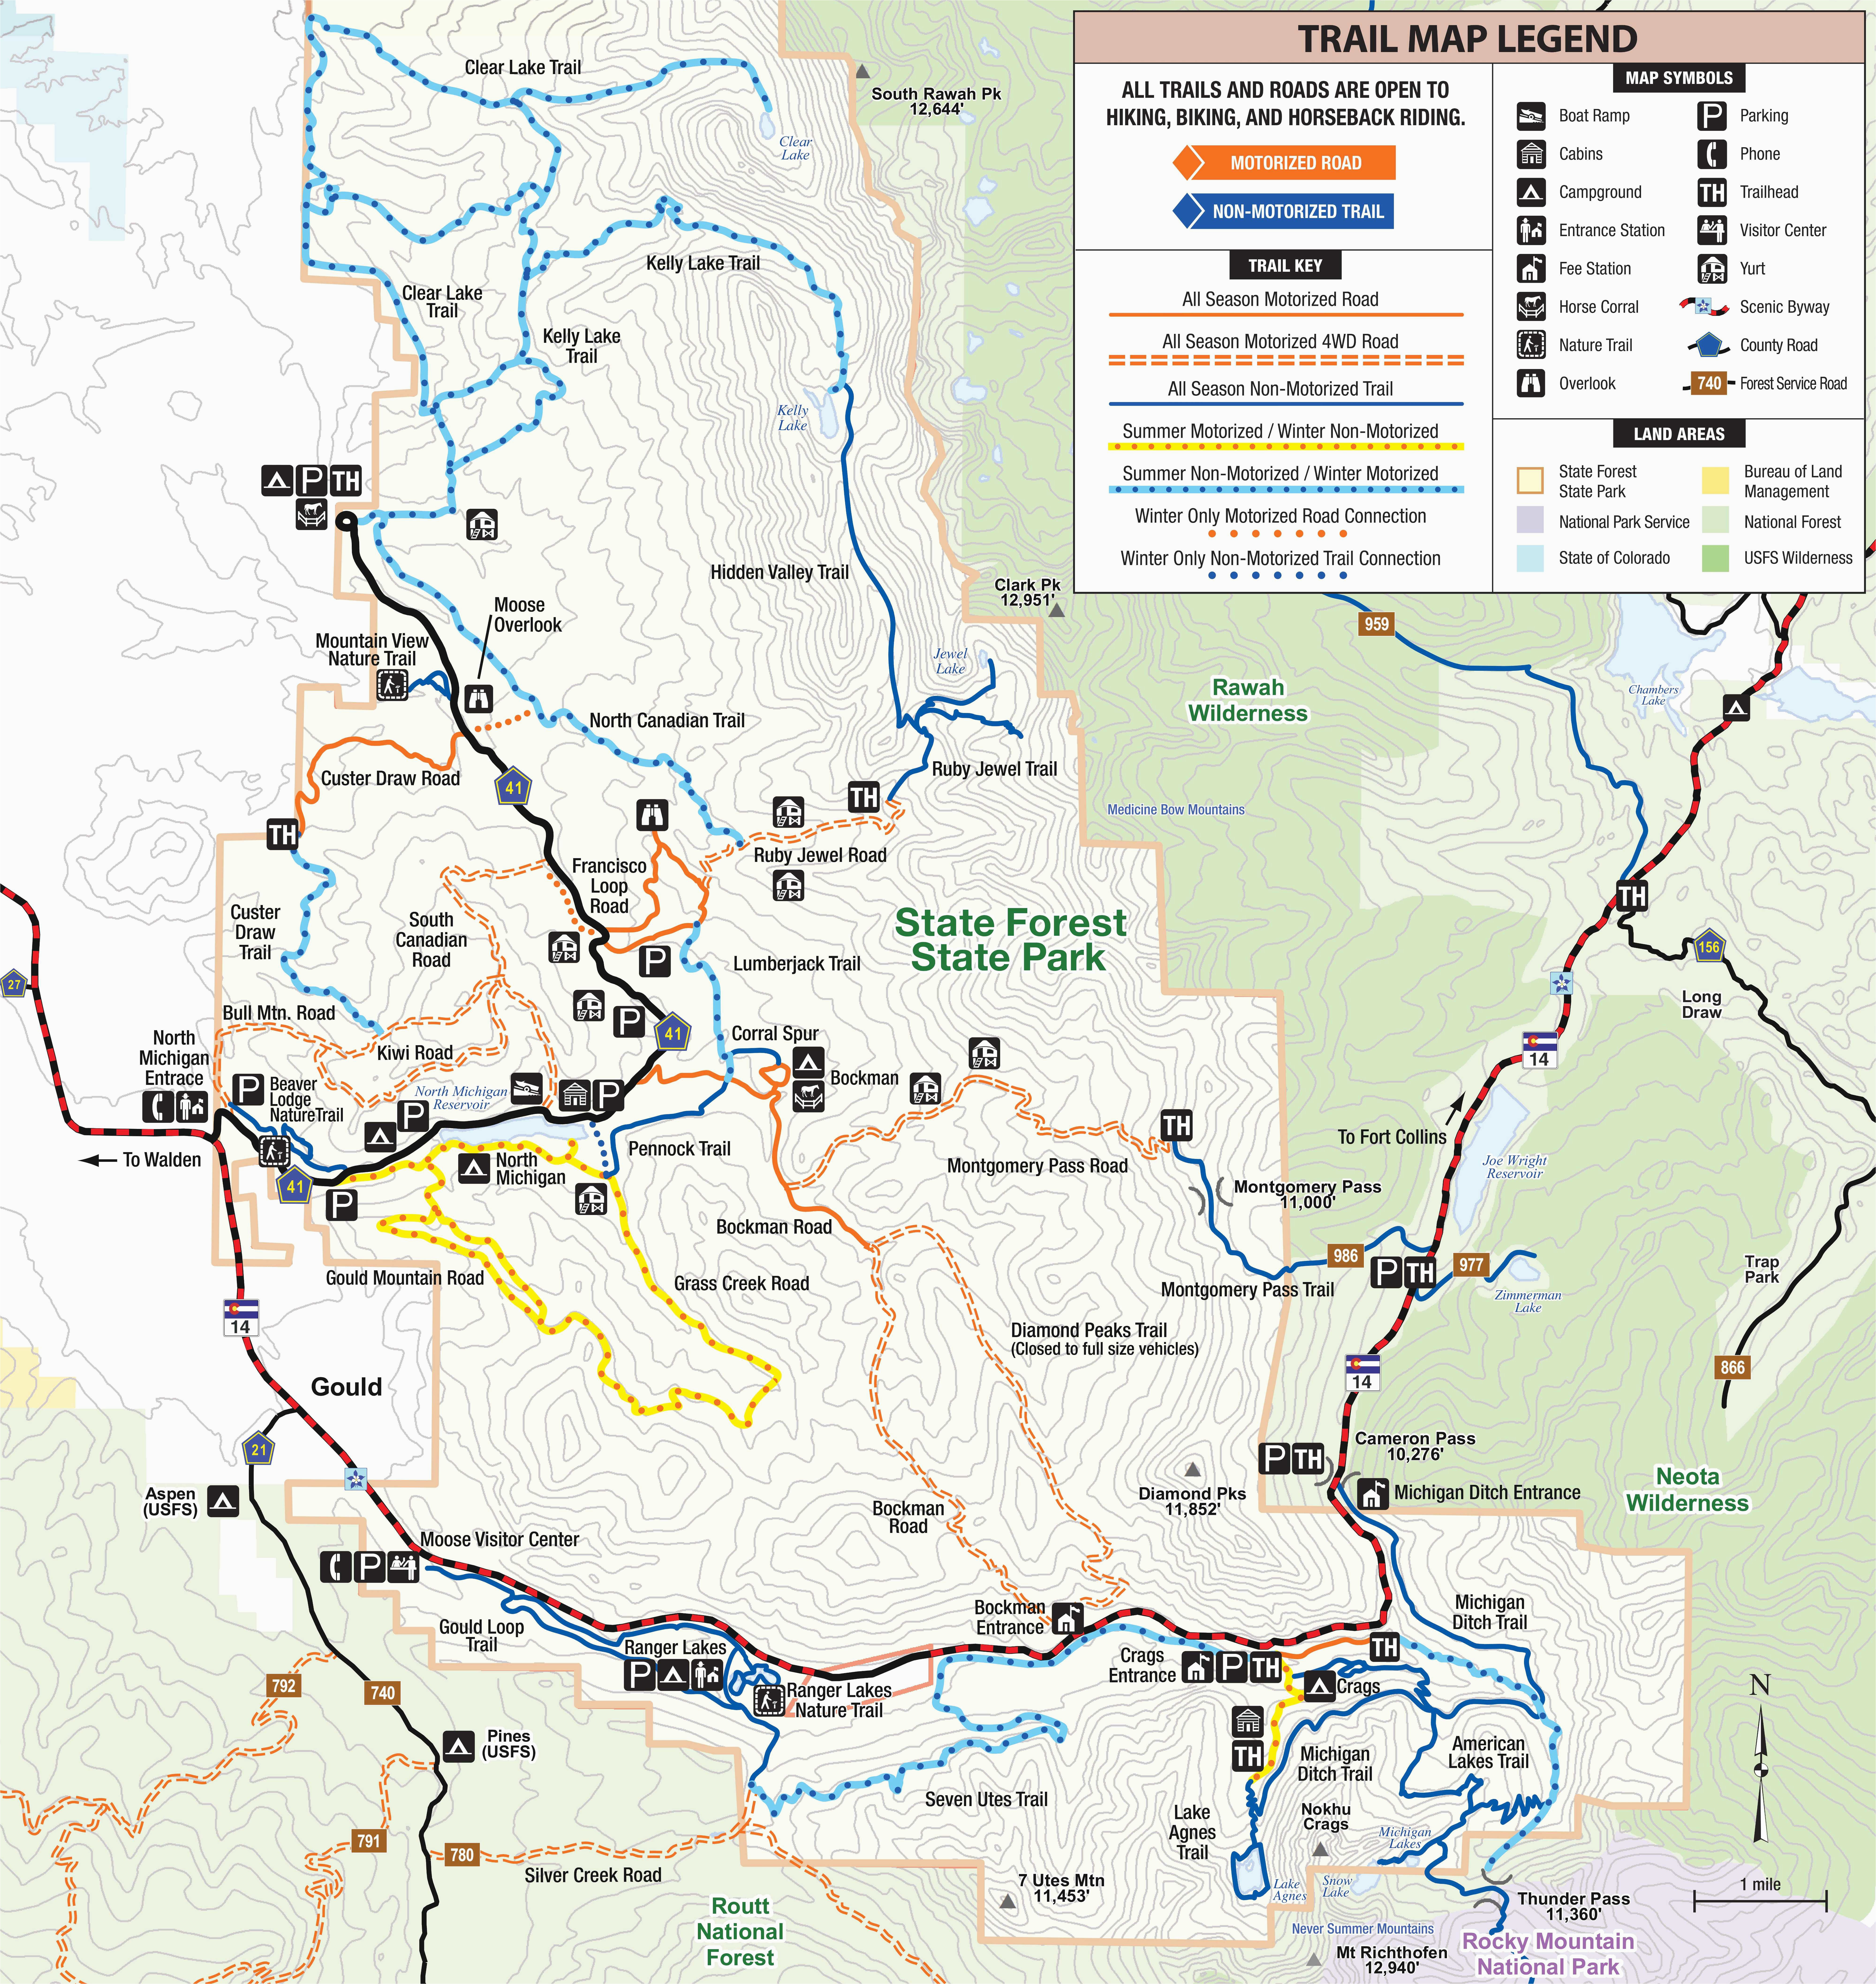 colorado national forest map fresh colorado county map with cities